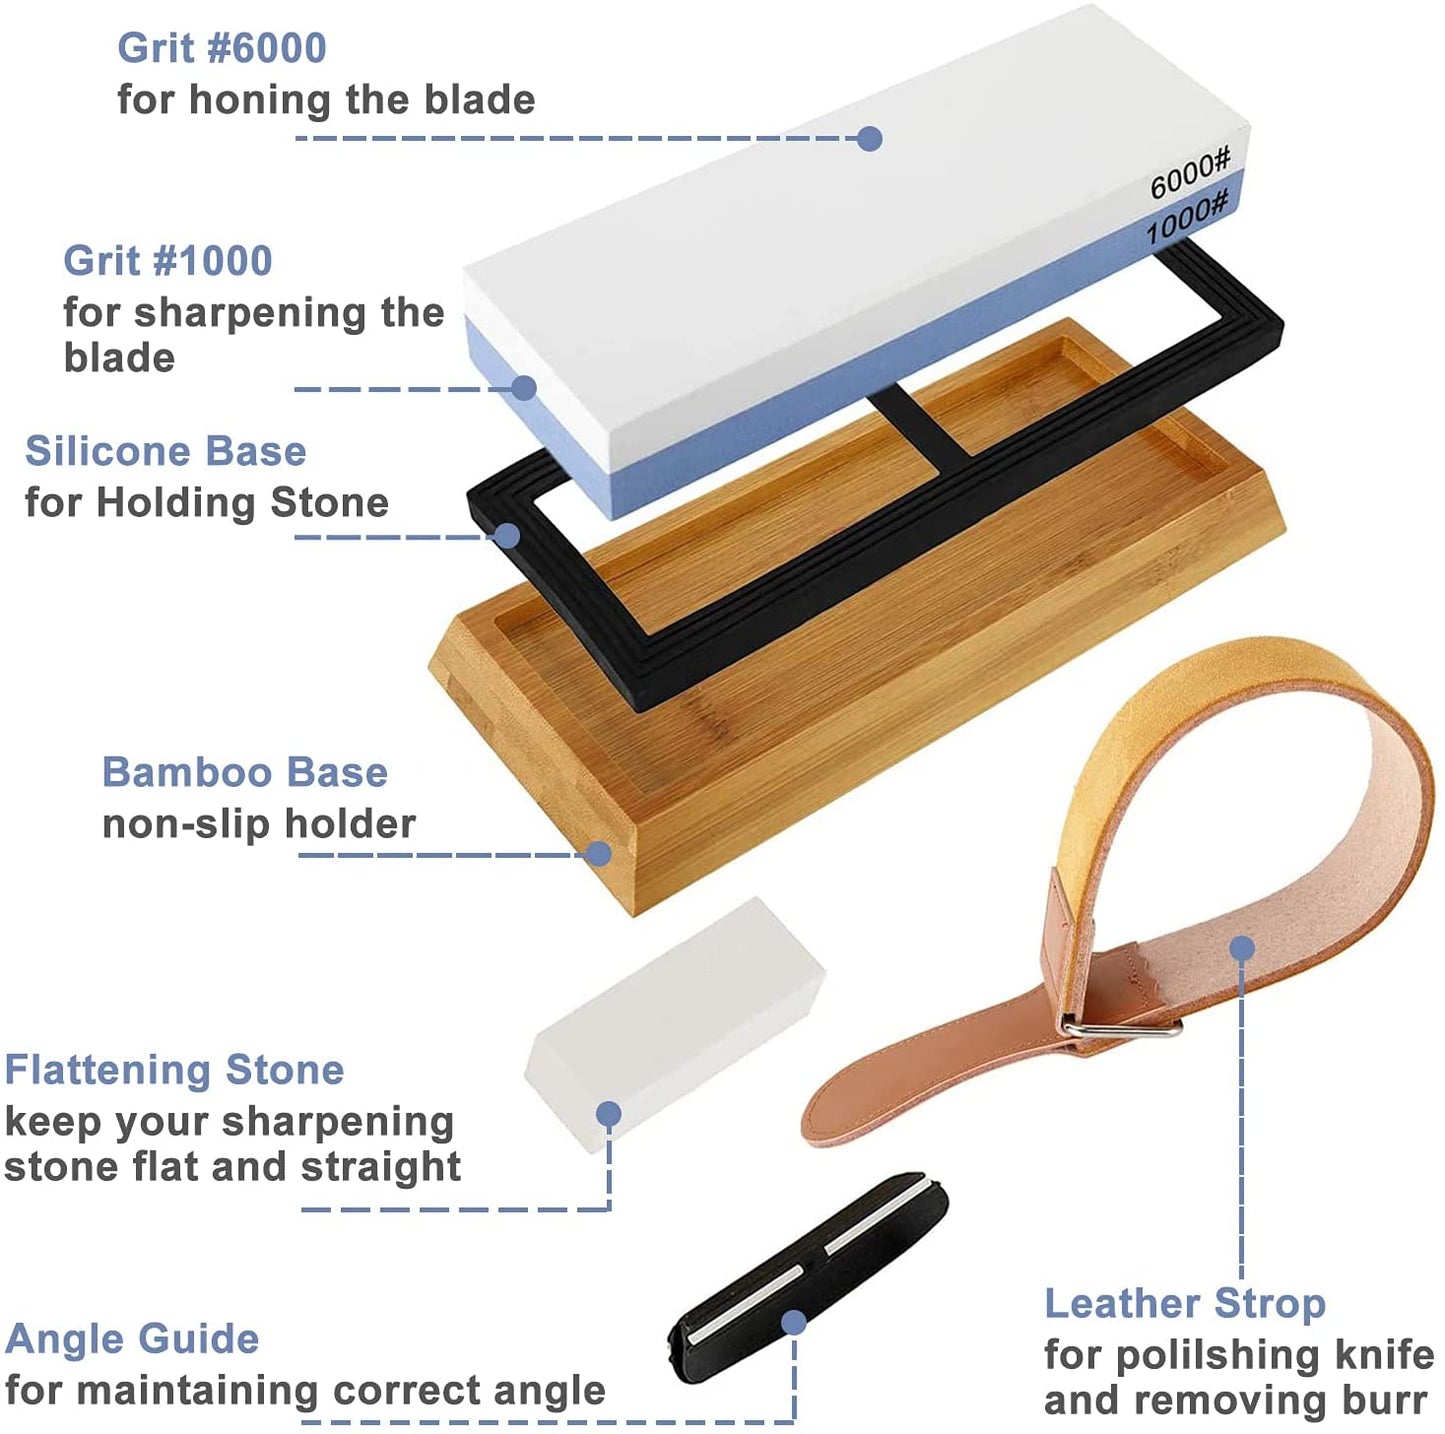 MFW Toolly Knife Sharpening Stone Set, 1000 6000 Grits Double-Sided Waterstone Kit with Angle Guide, Flattening Stone & Leather Strop